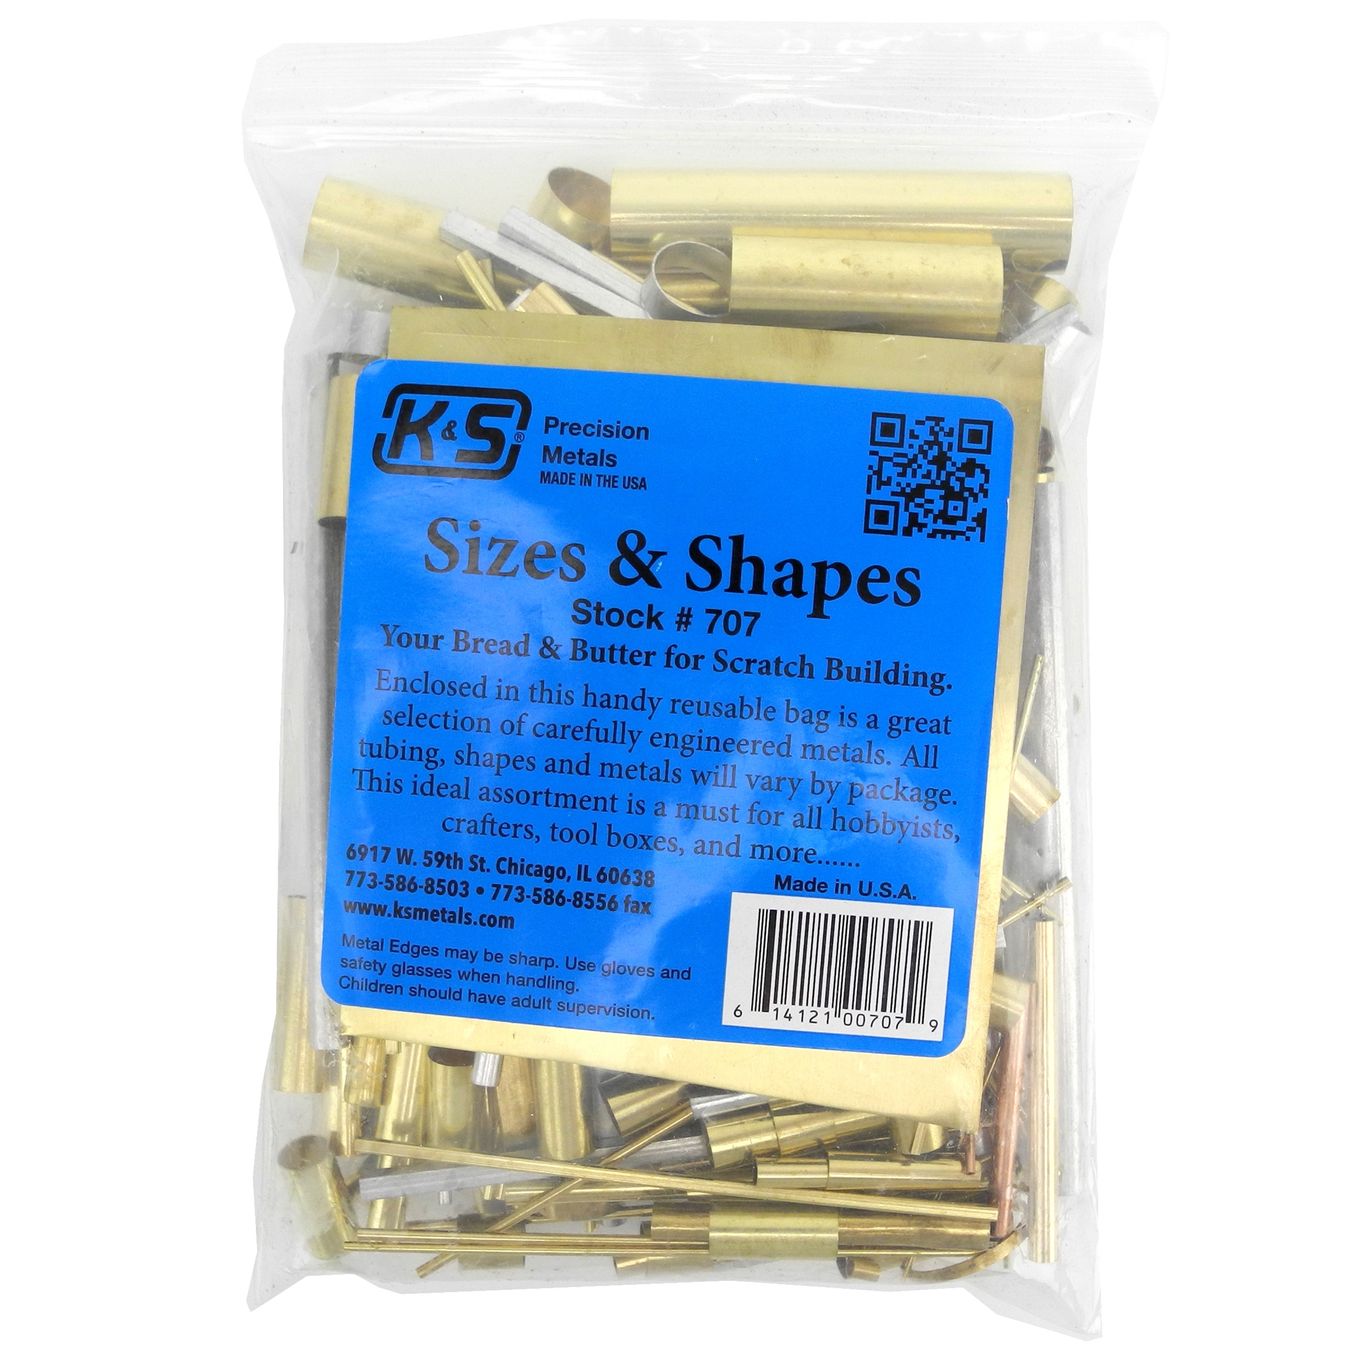  K&S Precision Metals 5078 Bendable Brass Strips, 032 X 1/4 &  1/2 X 12 Long, 3 Pieces per Pack, Made in The USA : Industrial & Scientific